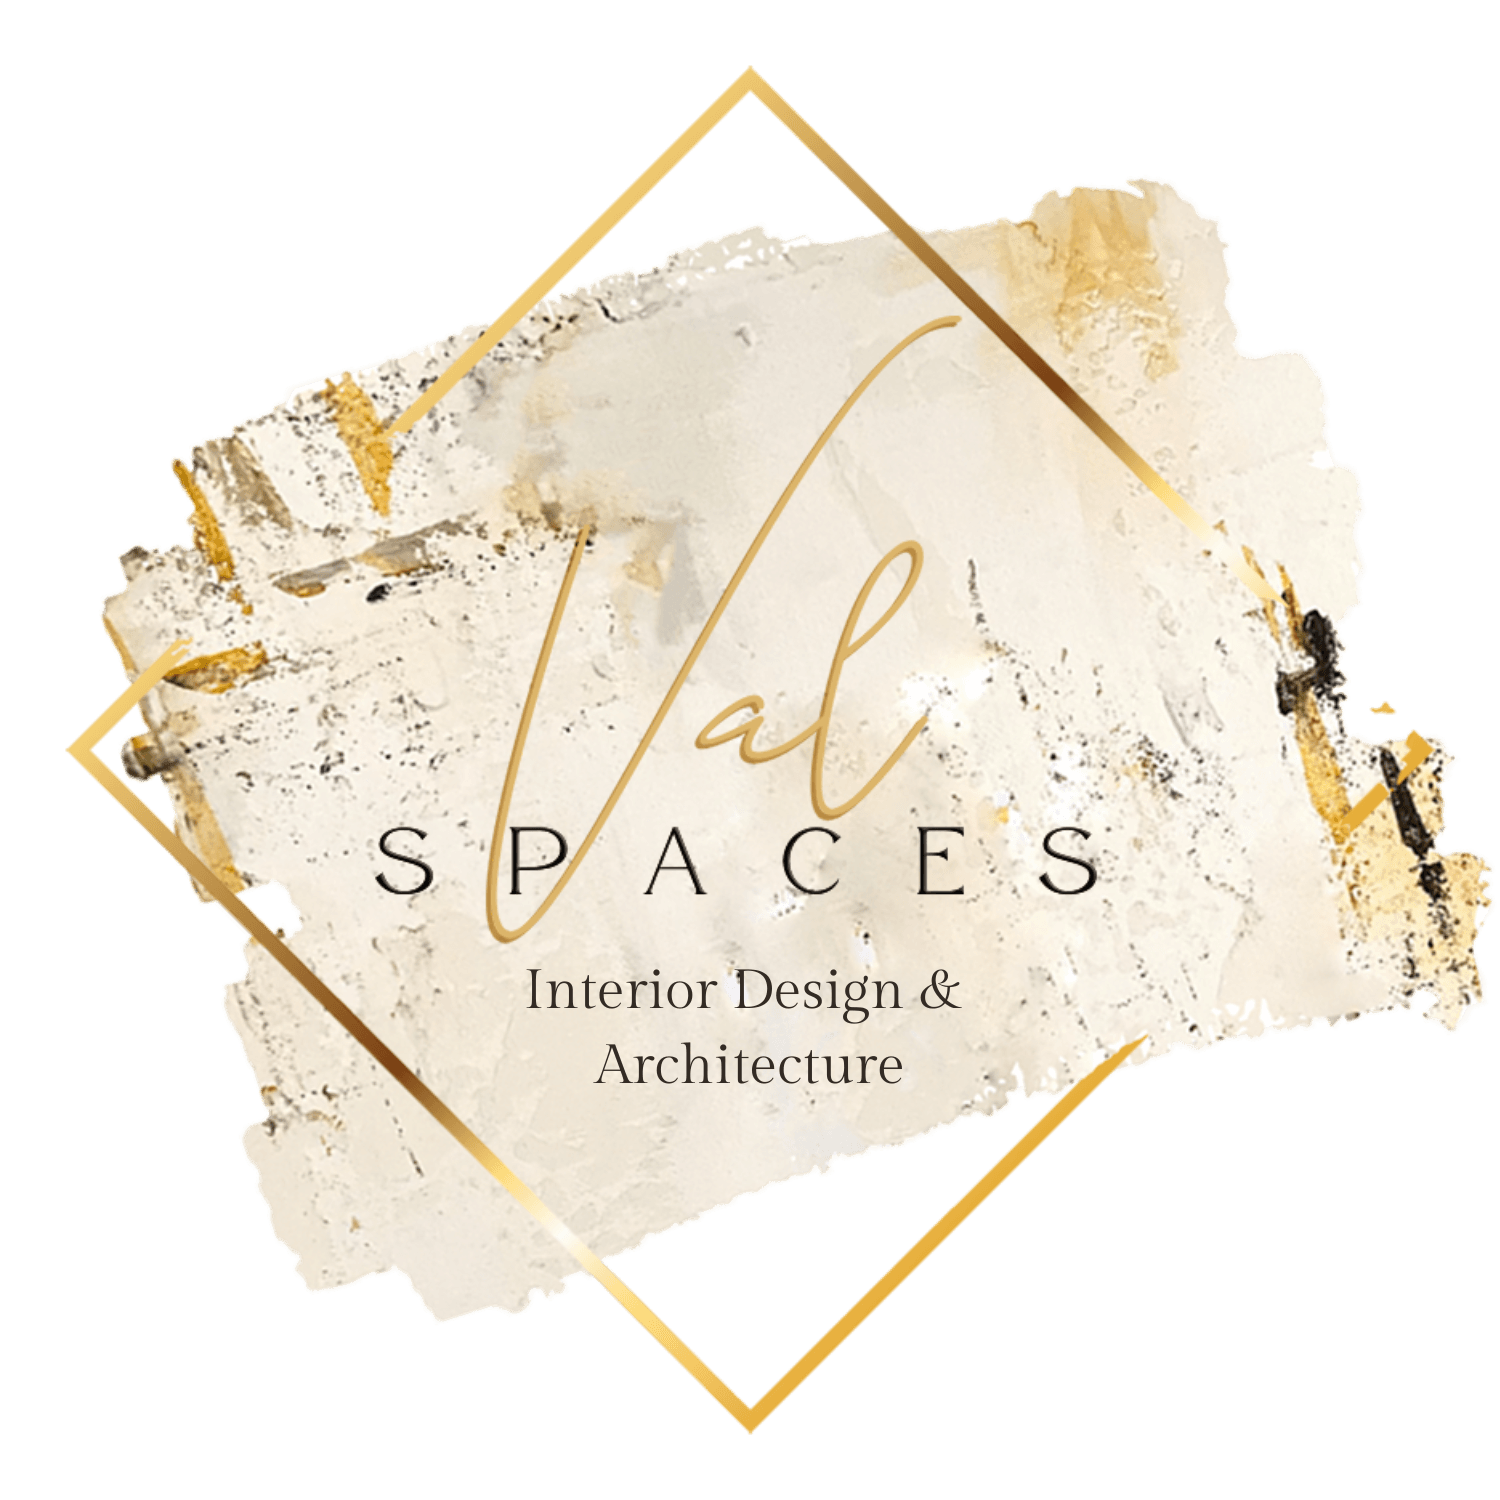 Val Spaces